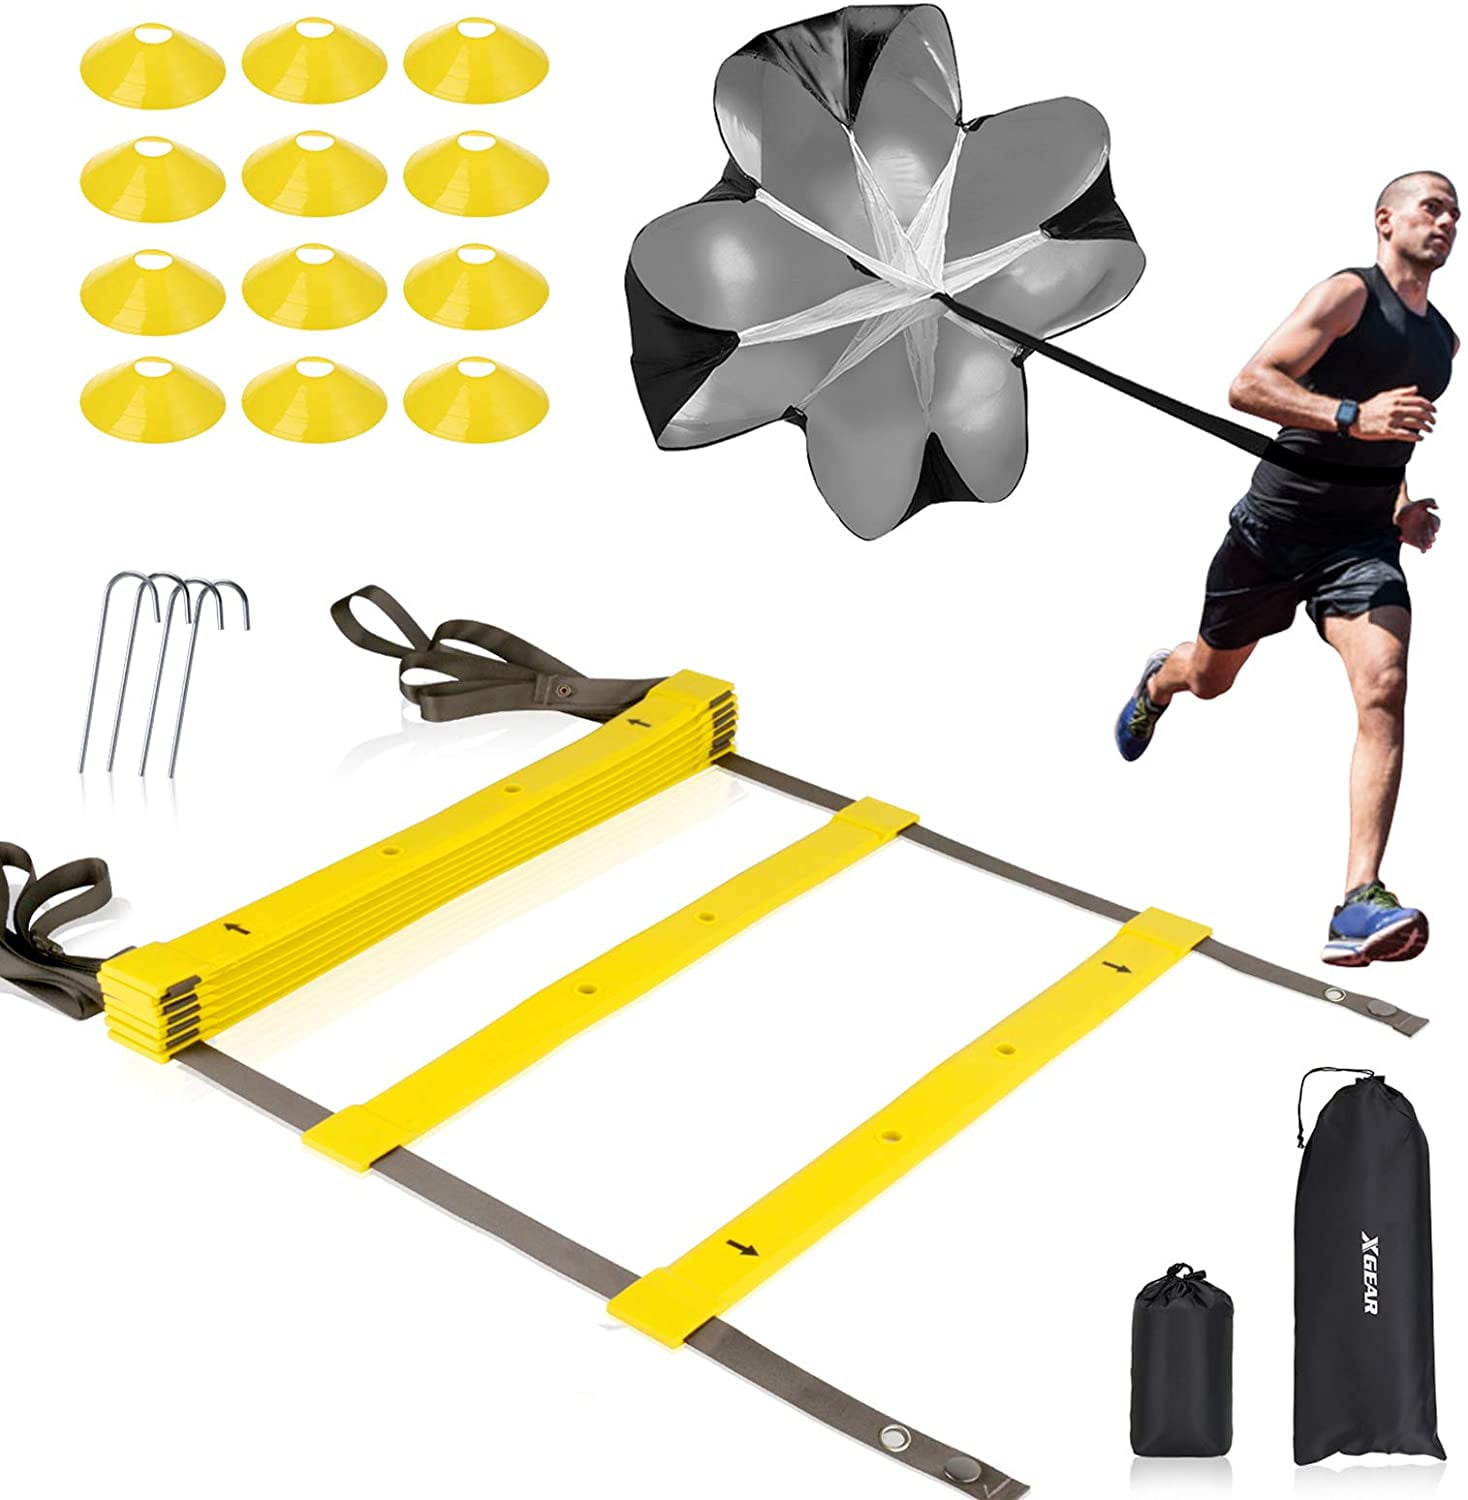 12 Rungs Speed Agility Ladder Soccer Football Sports Training Exercise Equipment 